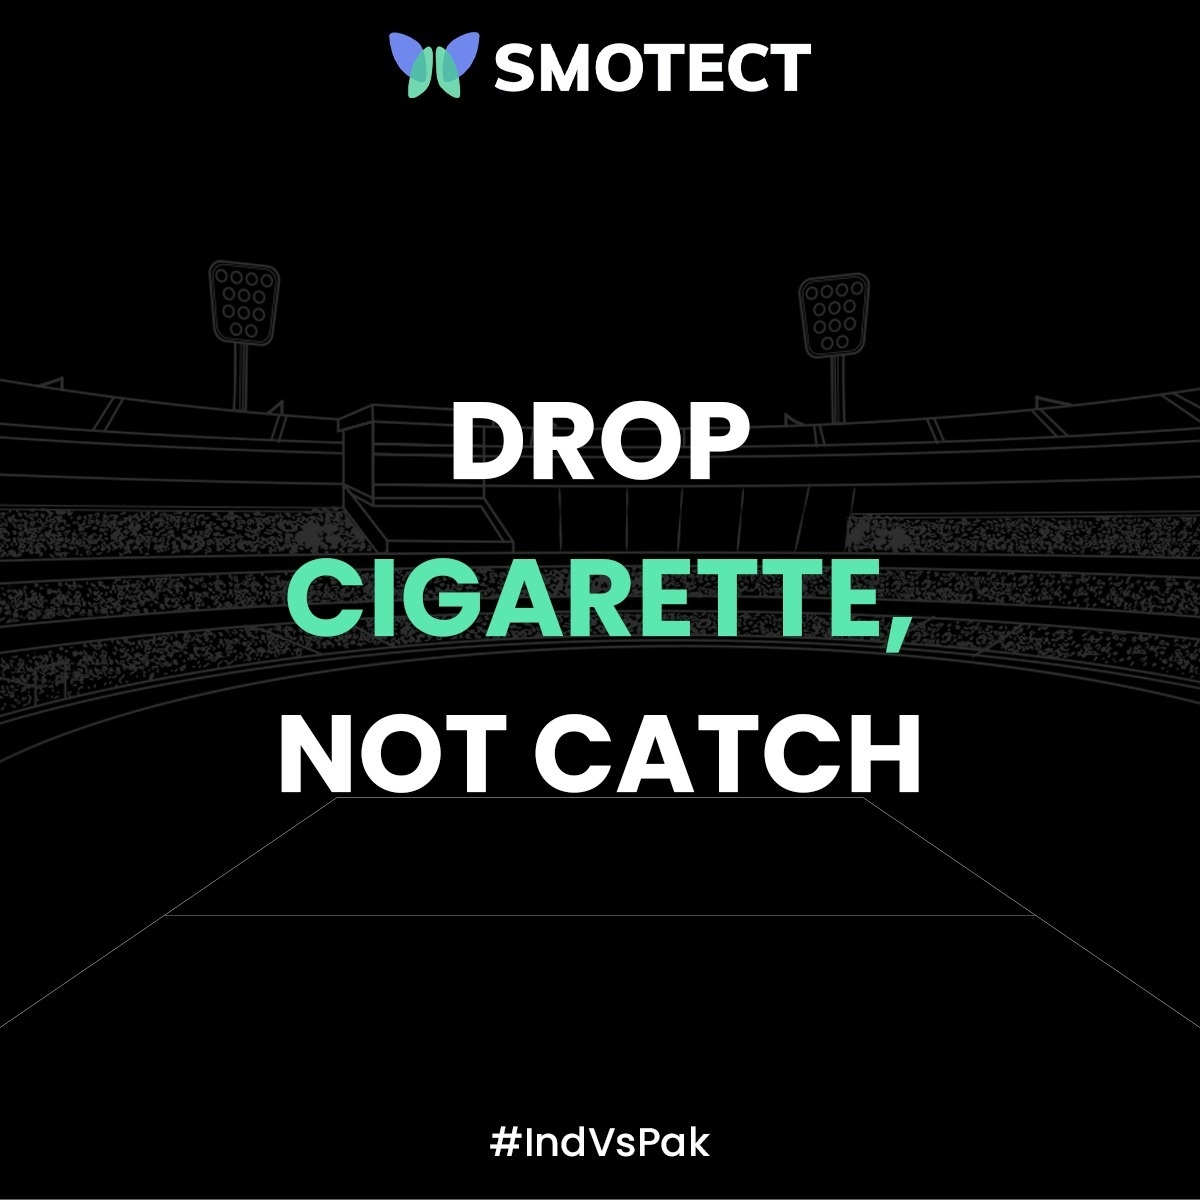 The catch in life's match is to drop cigarettes not the ball.🏏

#ArshdeepSingh #IndVsPak #MomentMarketing #Smotect #quitsmoke #quitsmokingnow #QuitSmokingwithSmotect #AyurvedicTablets #Alwayswithyou #ShopNow